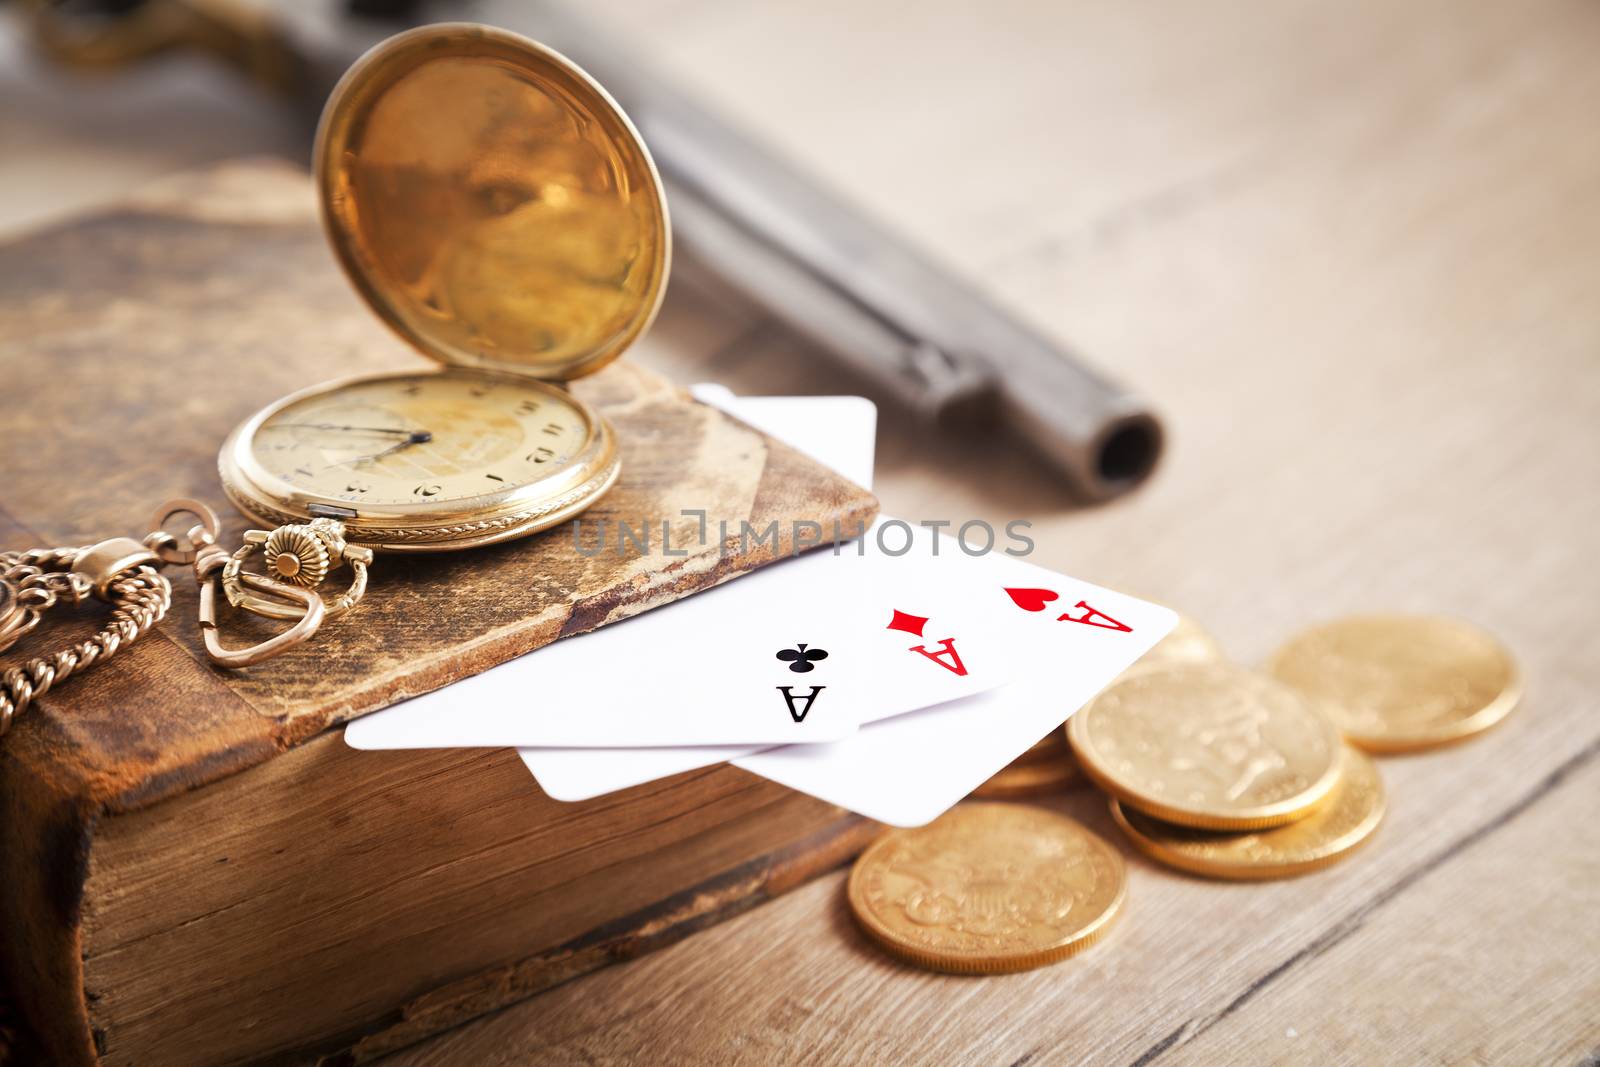 gambling and crime concept with gun, cards and golden coins